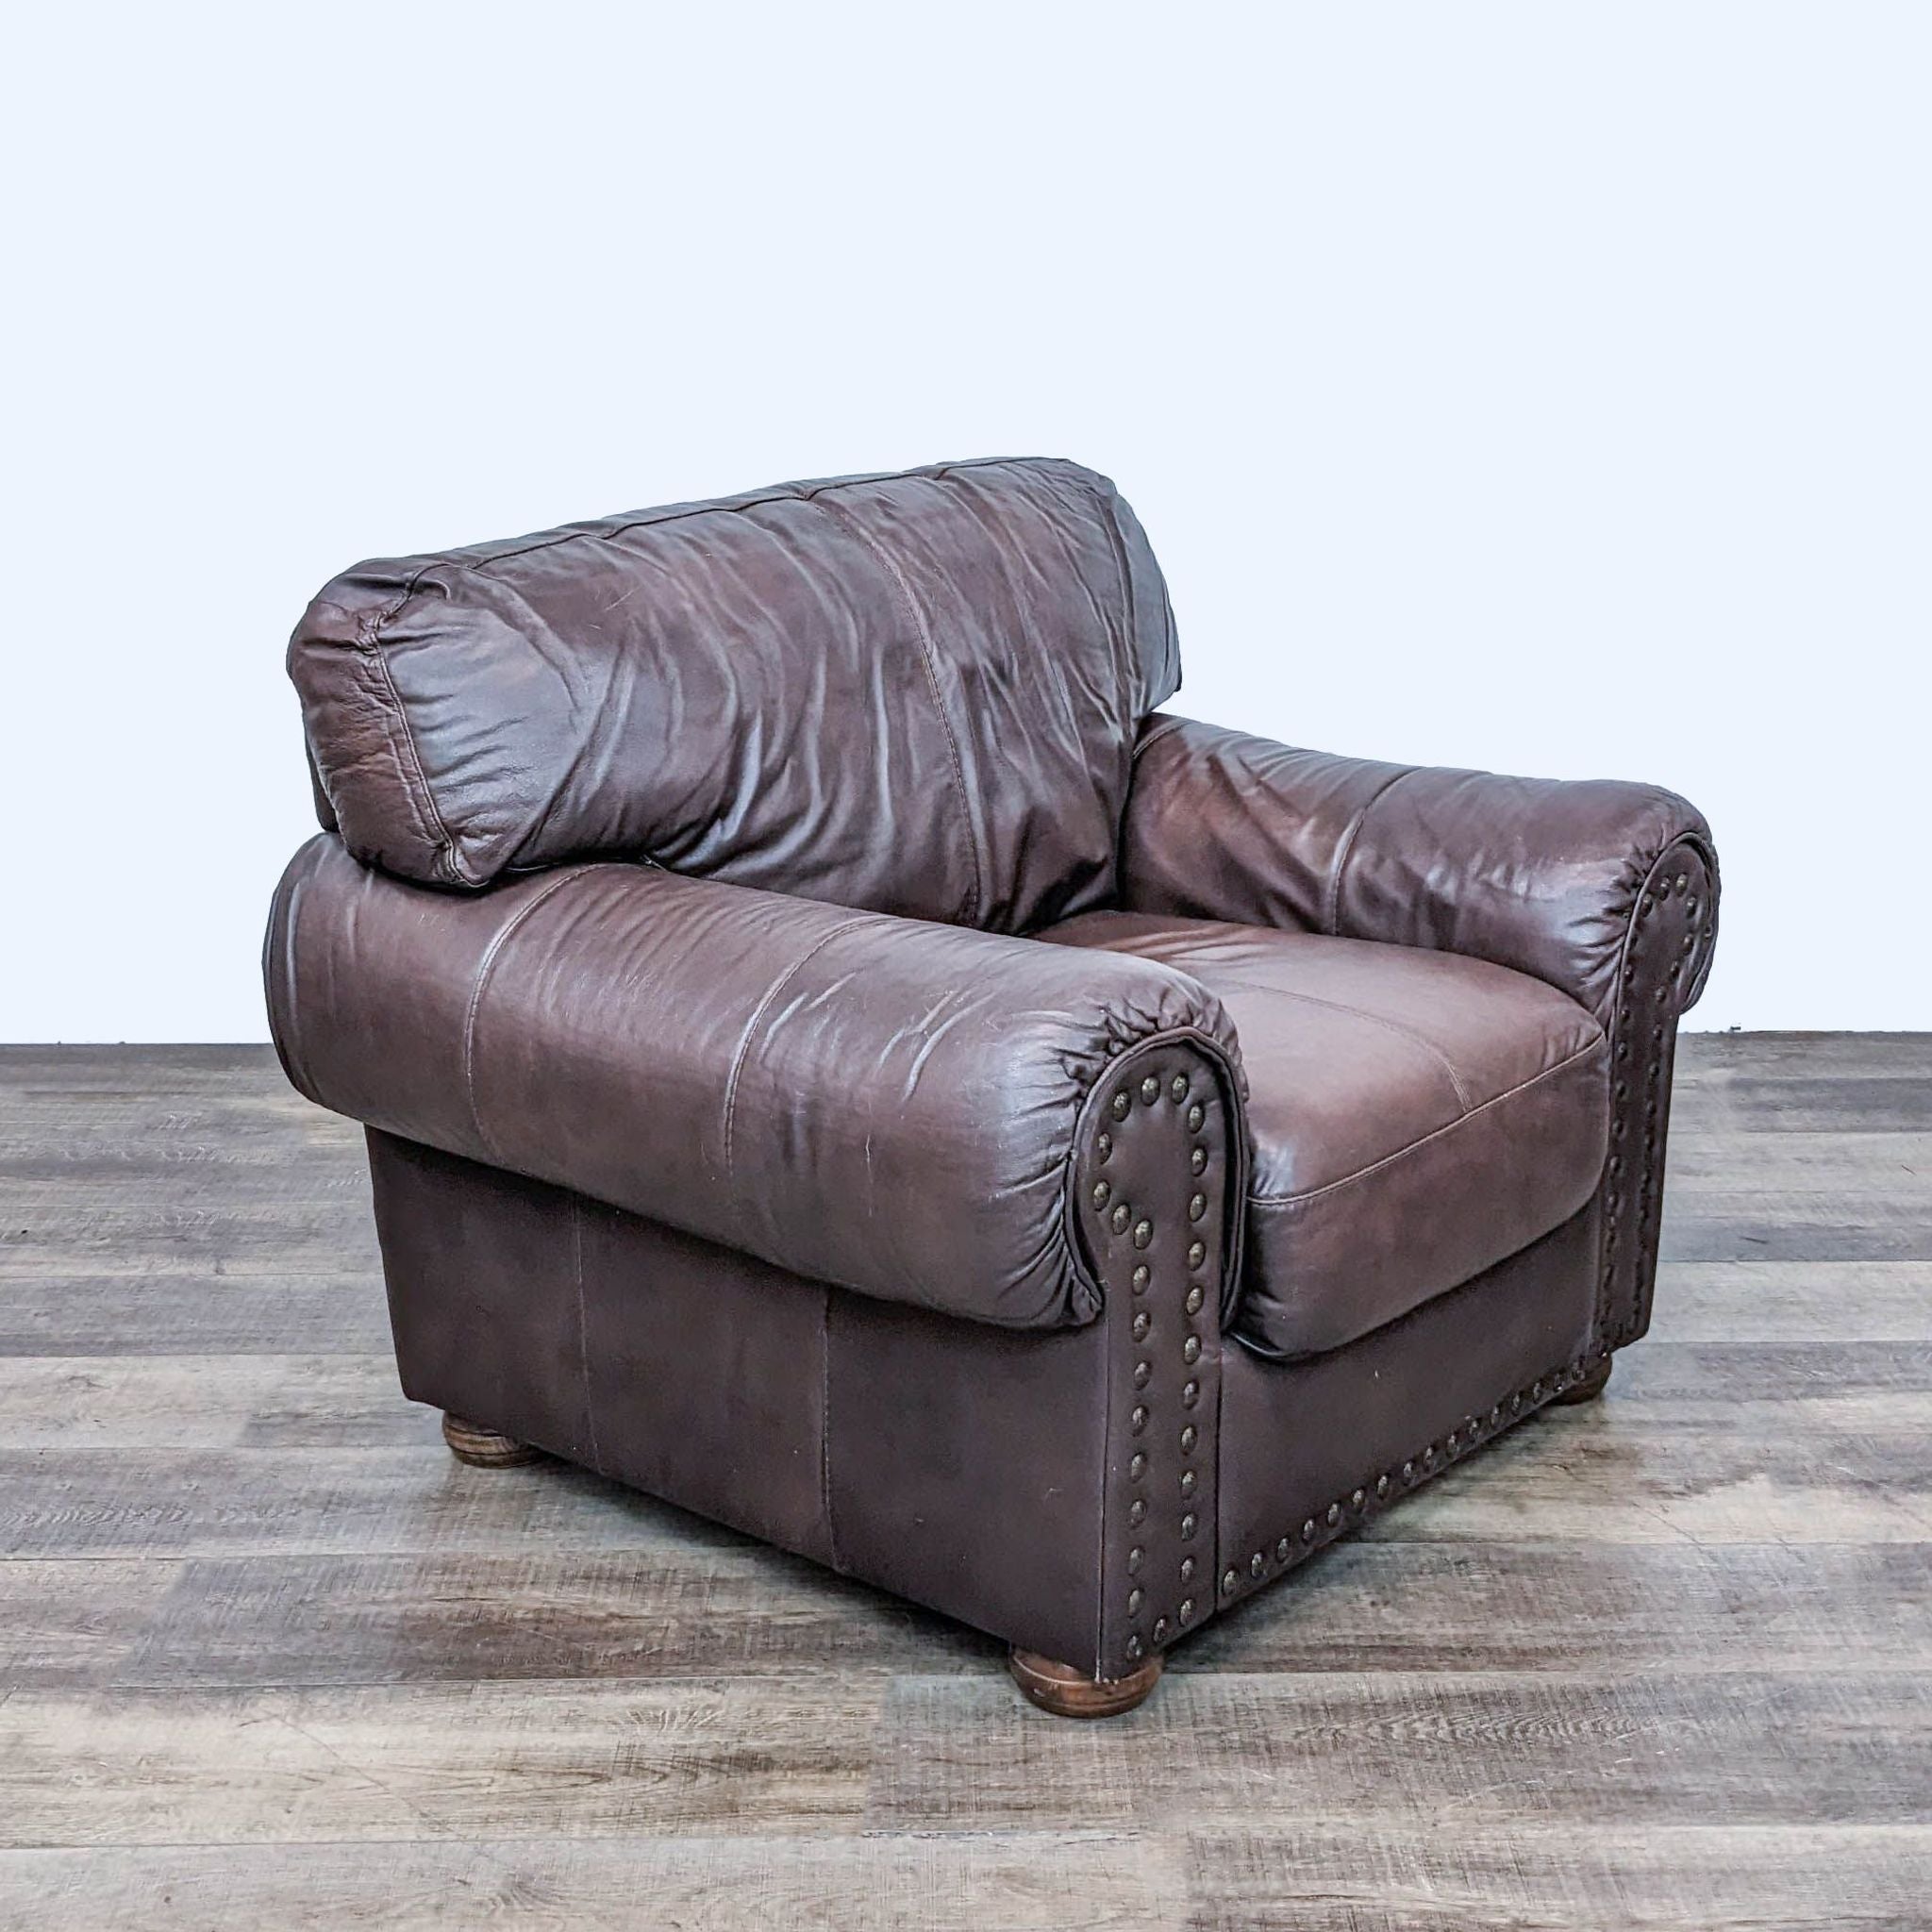 Reperch traditional leather lounge chair with rolled arms and nailhead trim on wood floor.